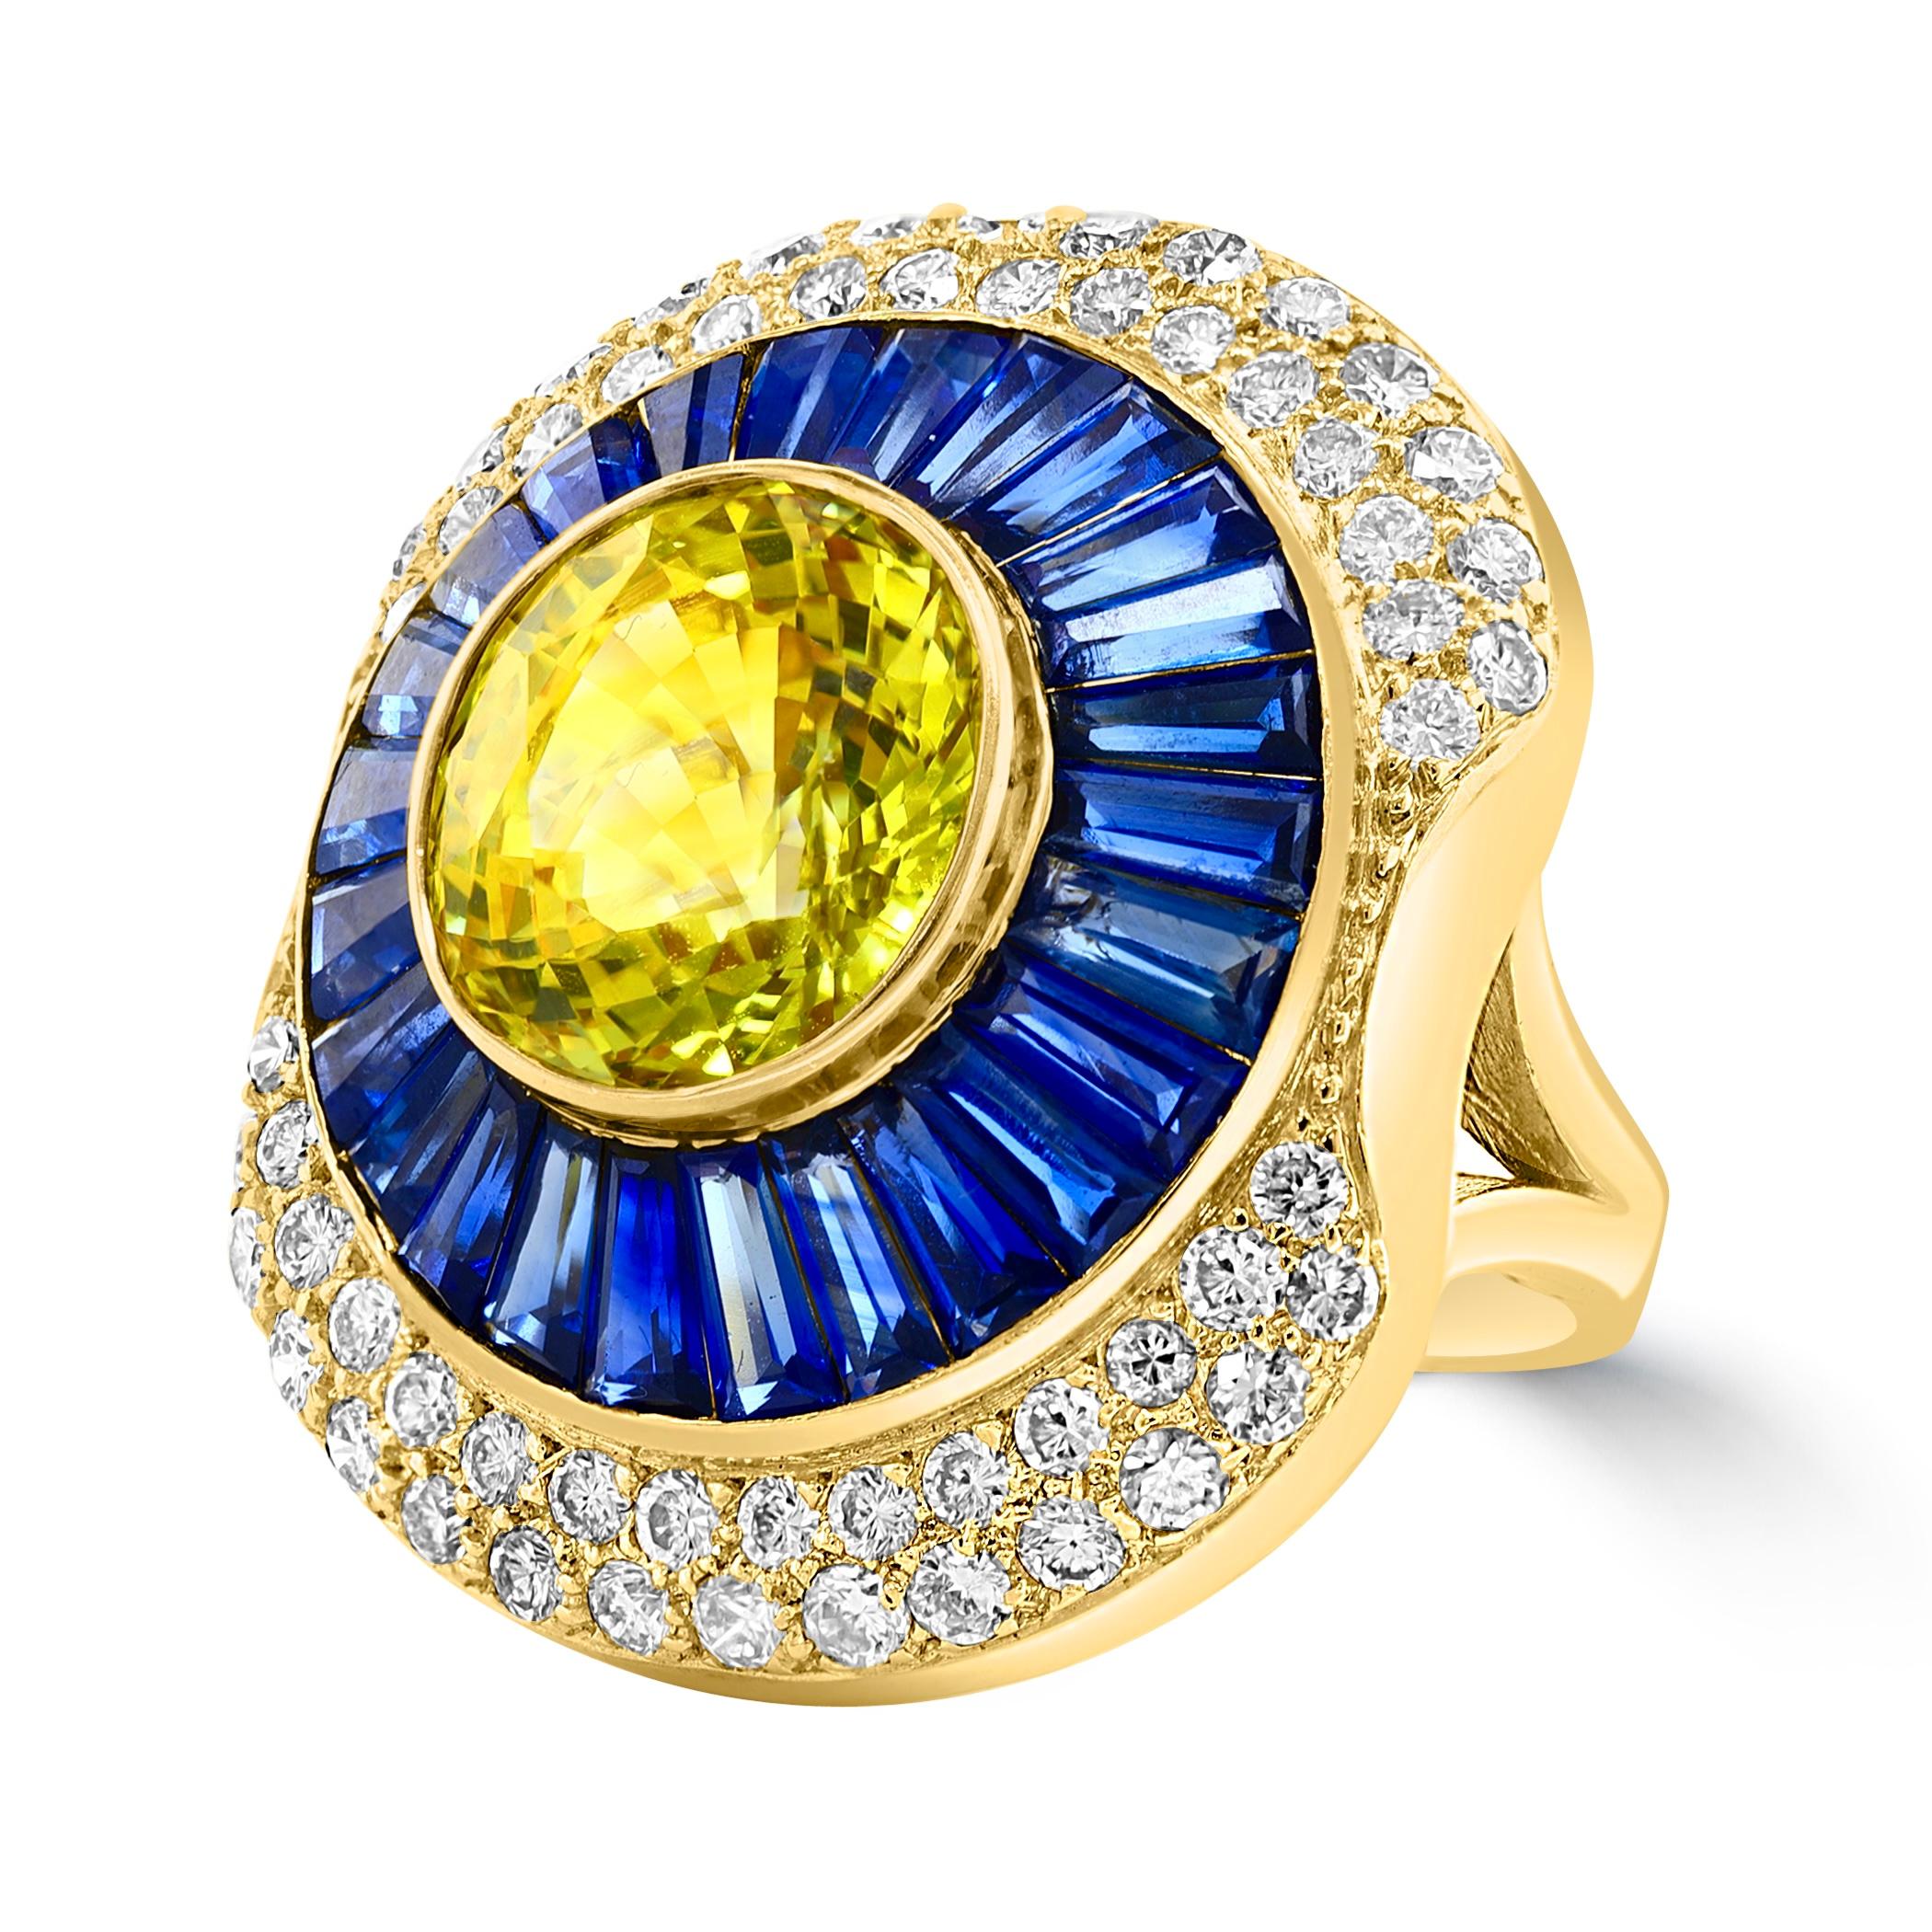 GIA Certified 10Ct Natural Ceylon Yellow Sapphire, Blue Sapphire & Diamond Ring For Sale 11